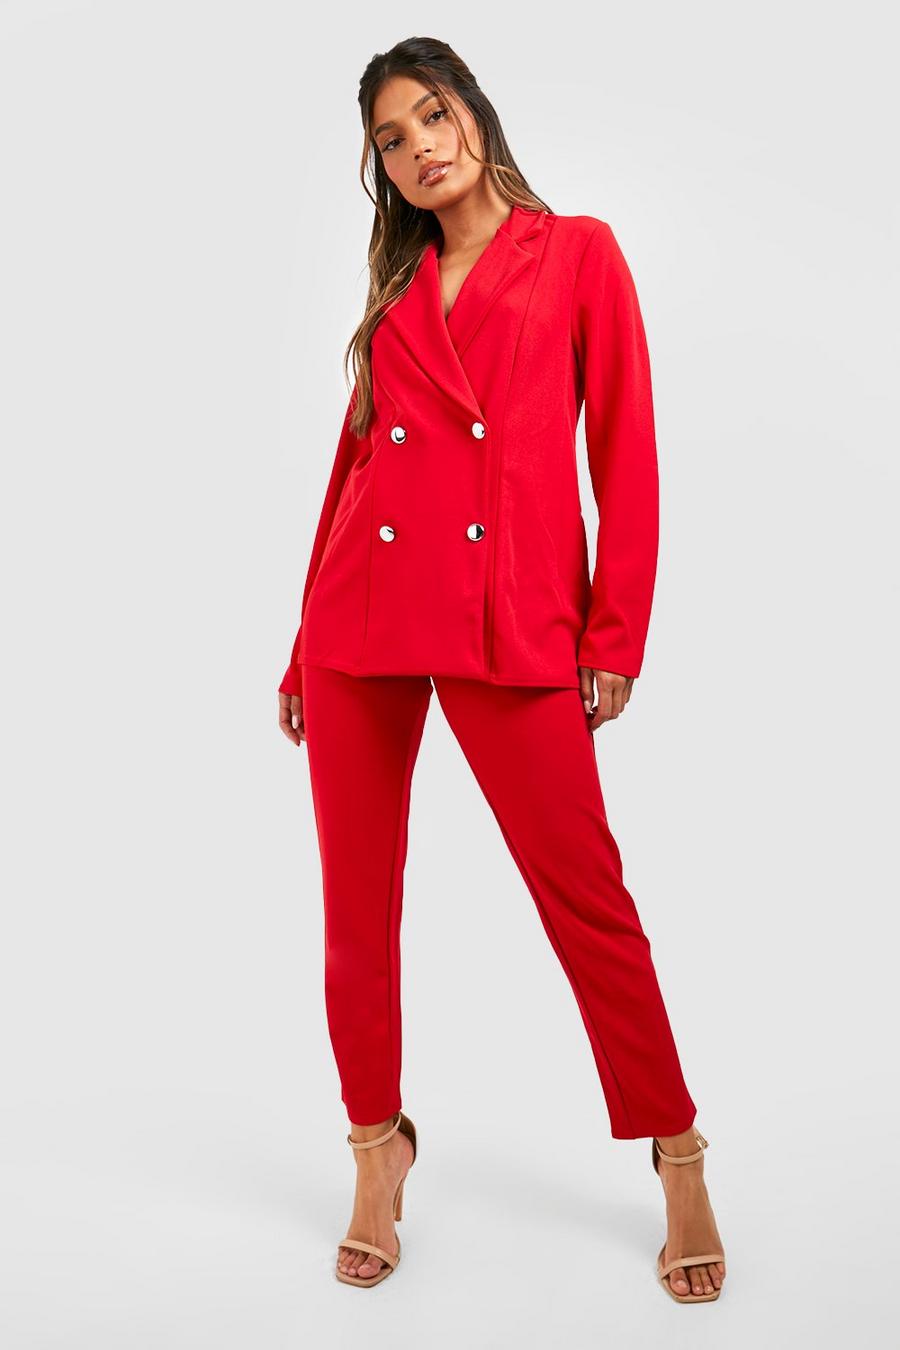 Red Jersey Knit Double Breasted Blazer And Pants Suit Set